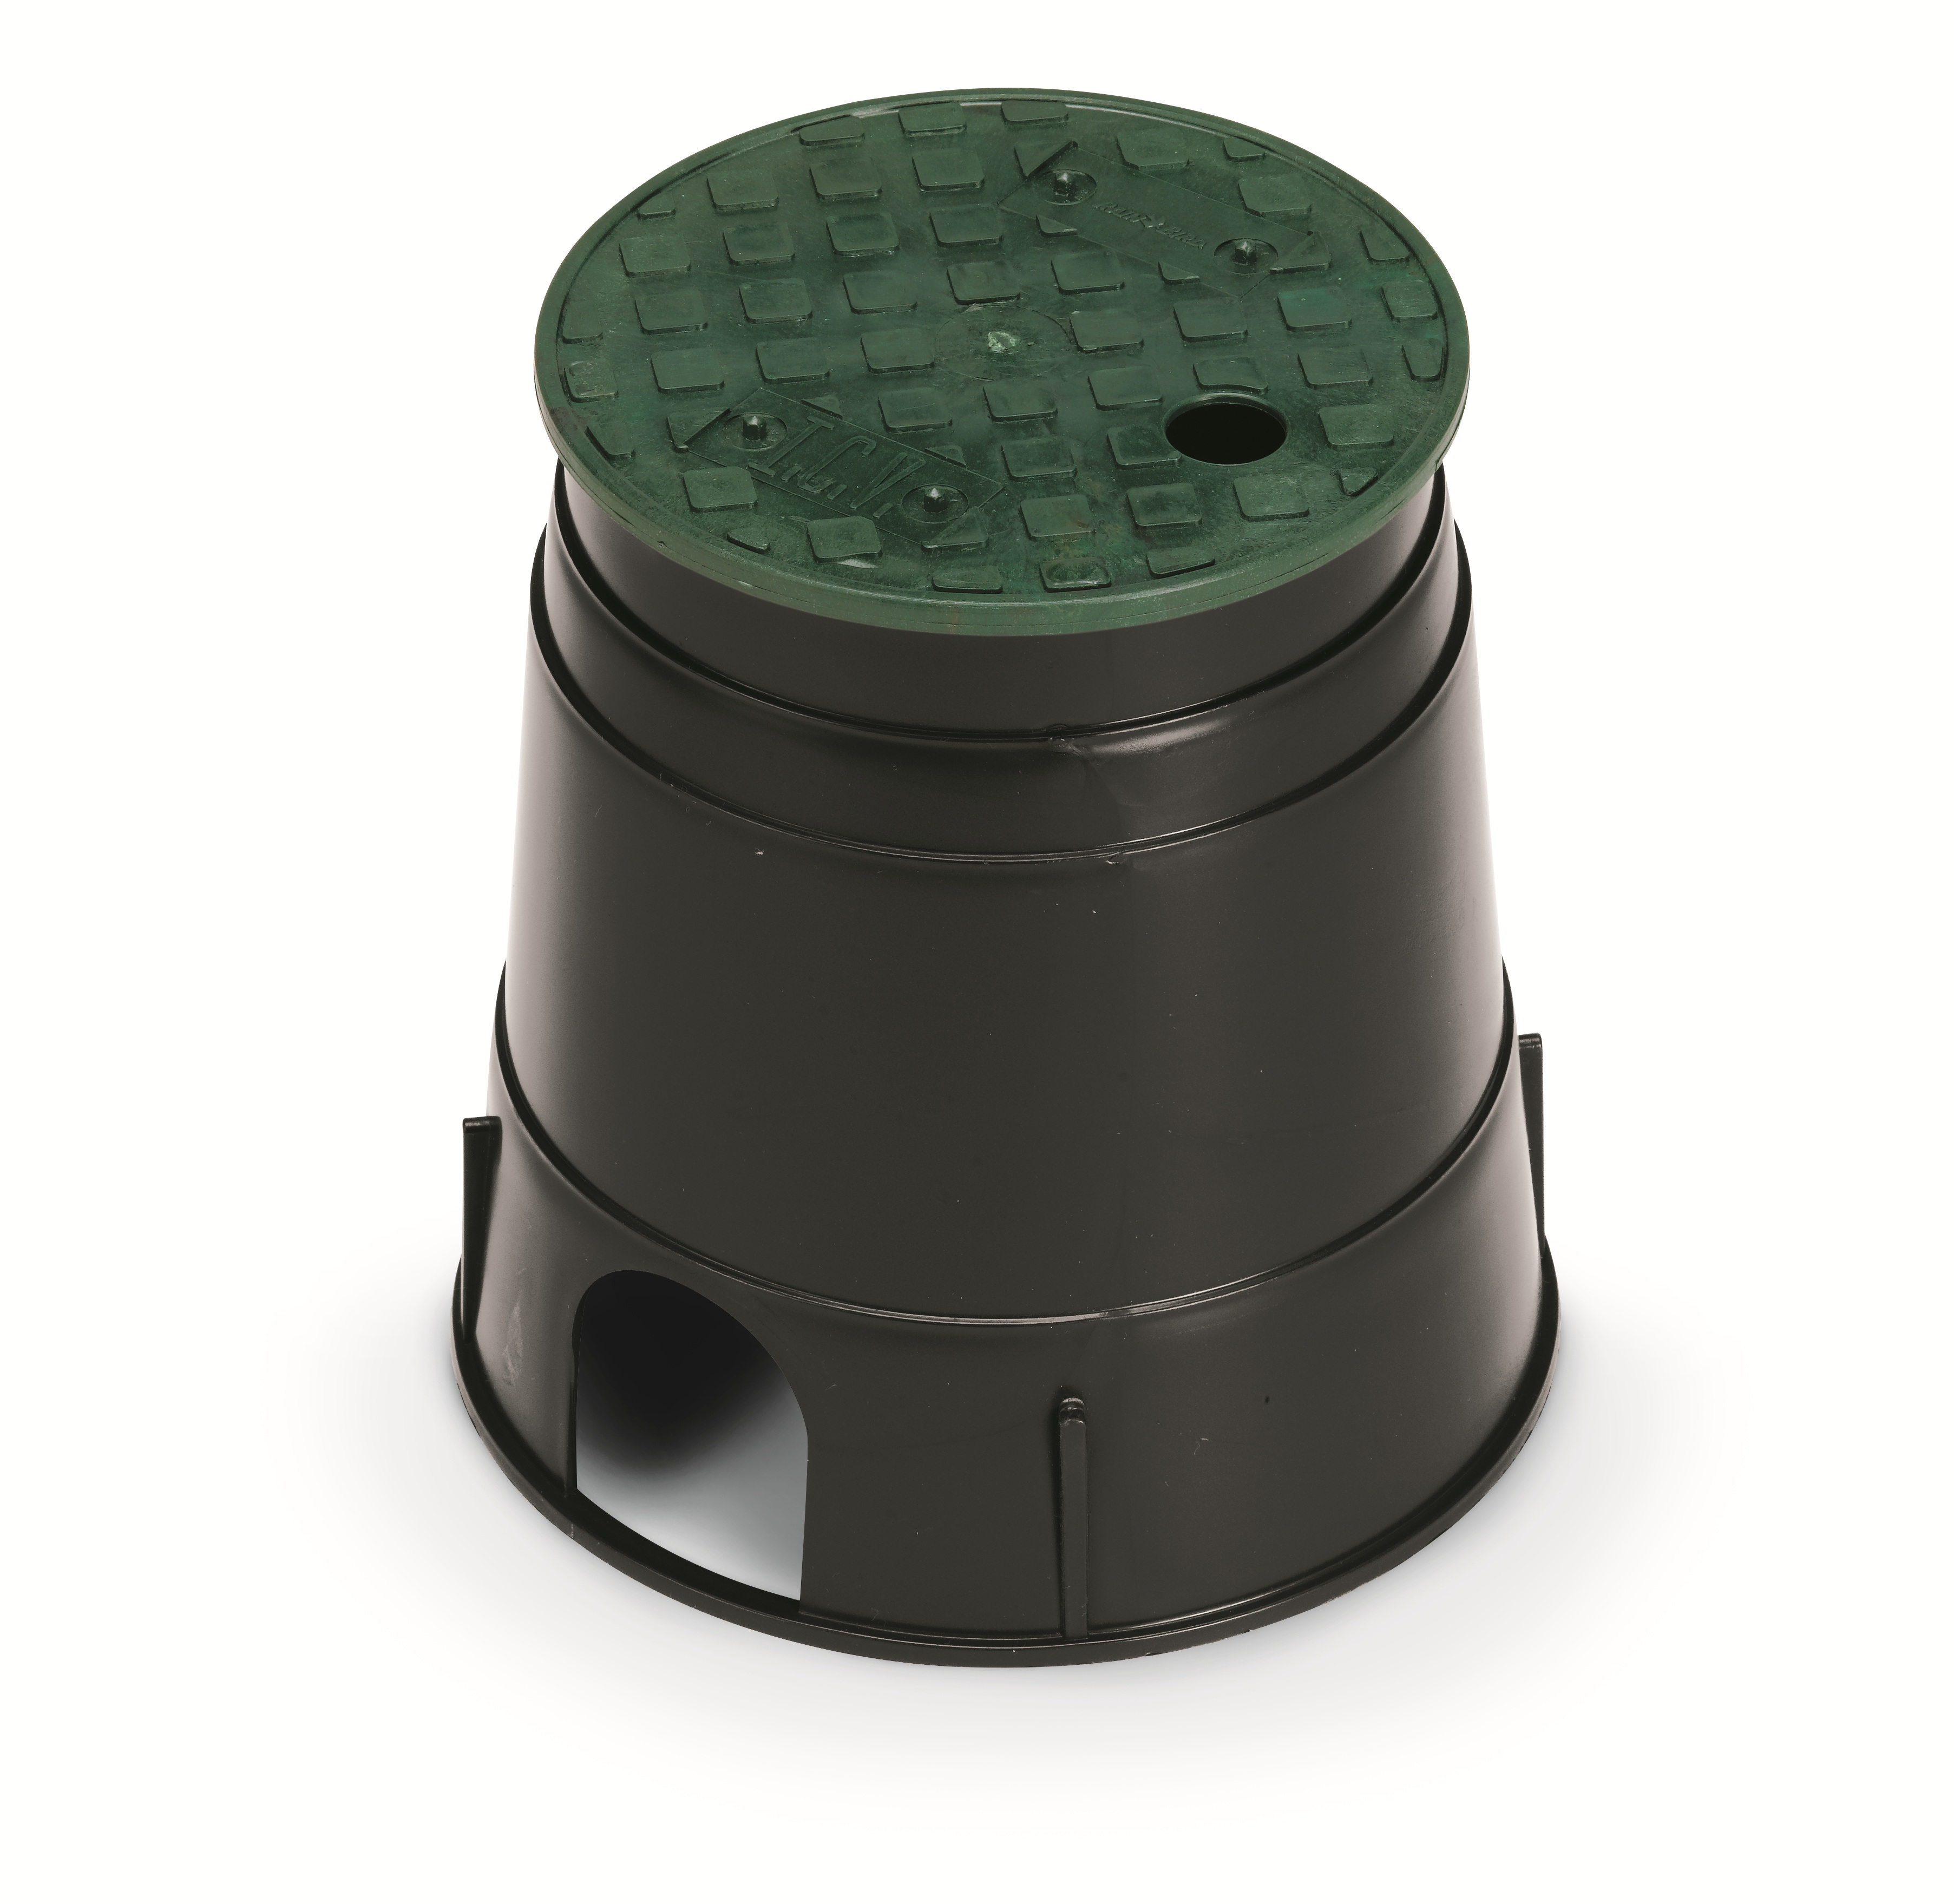 PVB Professional Series 6-inch Round Valve Box with Green Lid